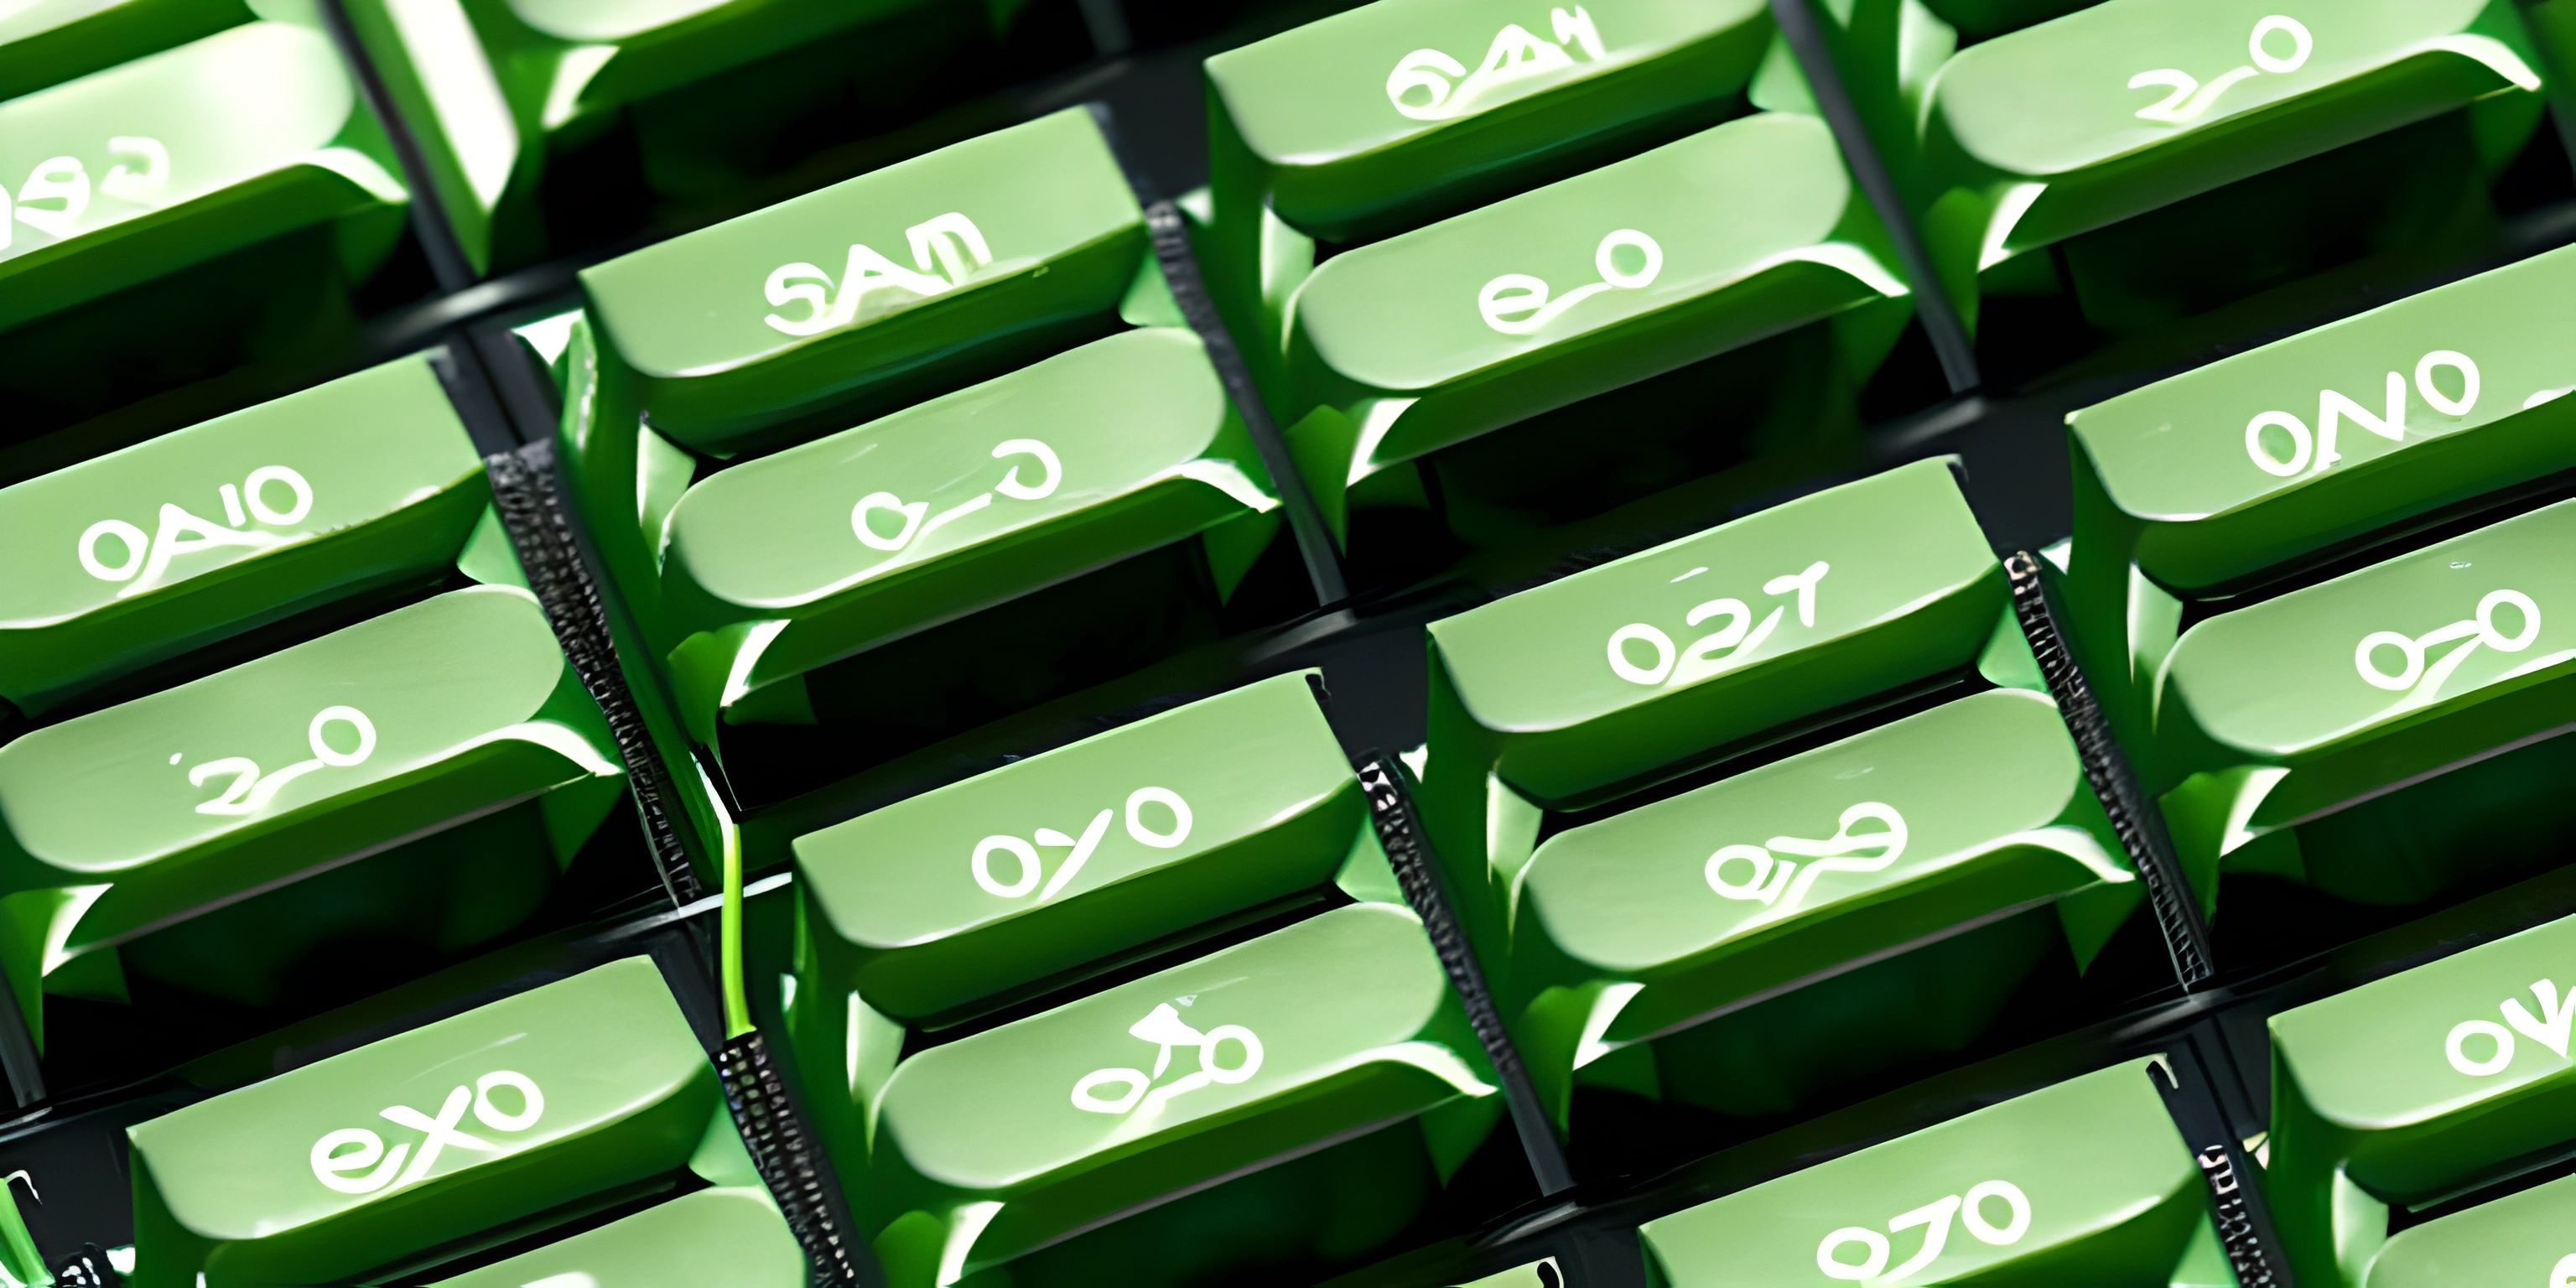 many green keys with white numbers sitting on top of them together, all together, in front of a computer keyboard